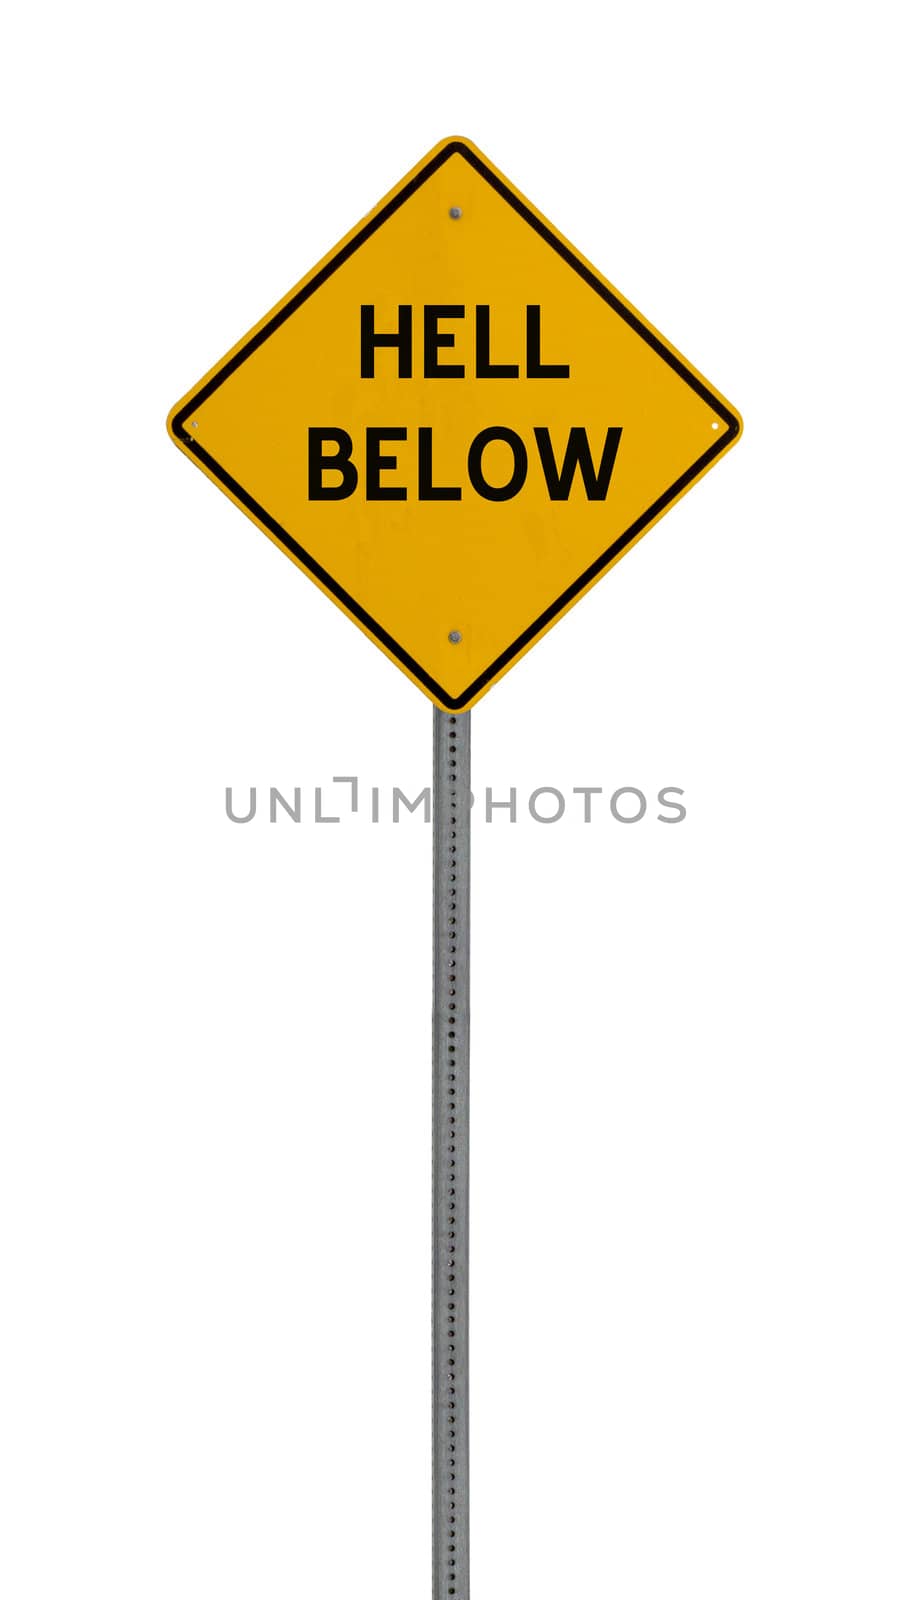 hell below - Yellow road warning sign by jeremywhat